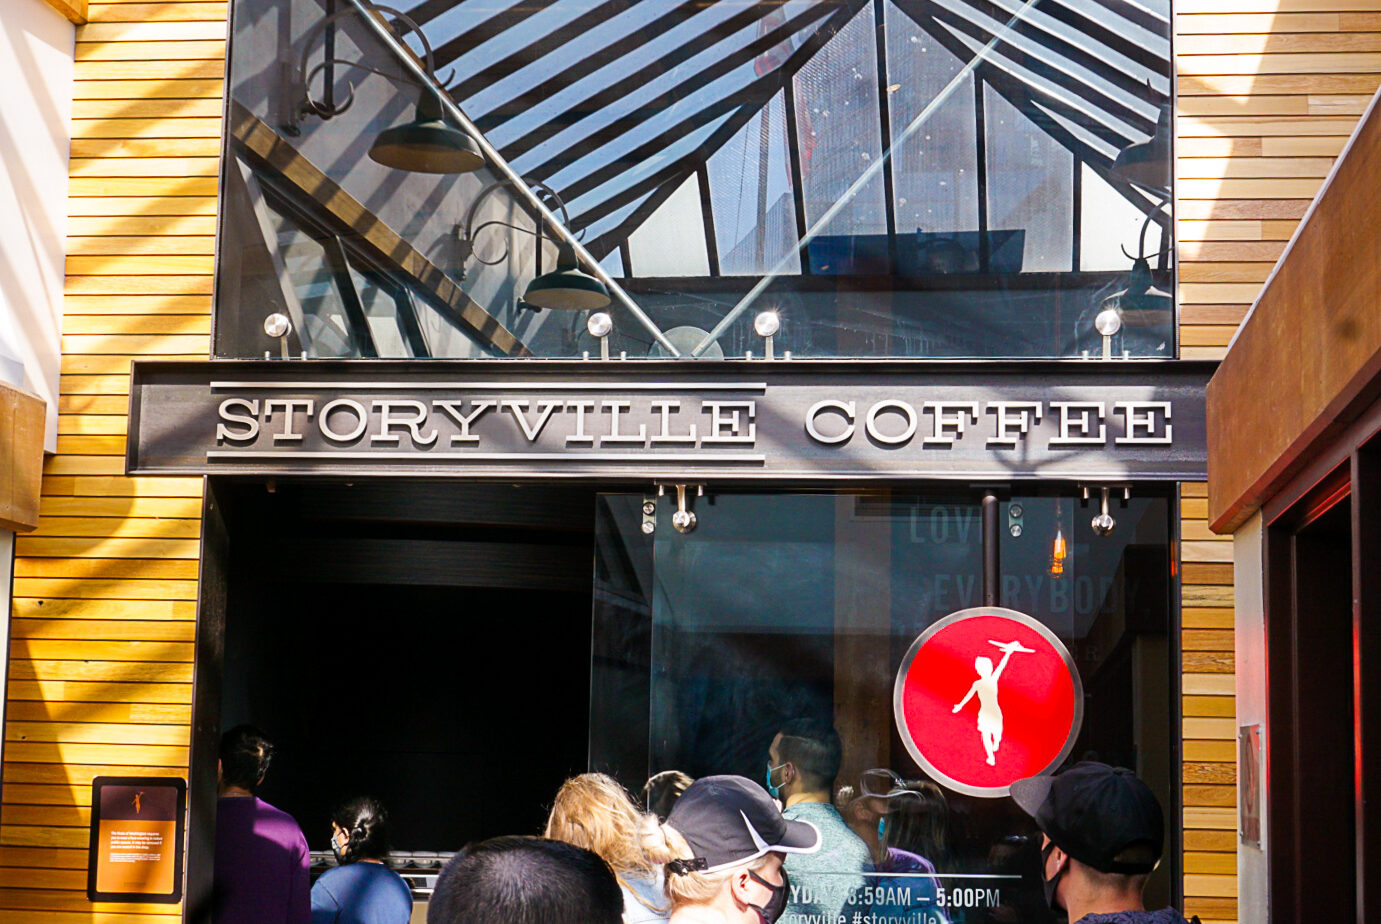 Entrance to Storyville coffee in Pike Place Market